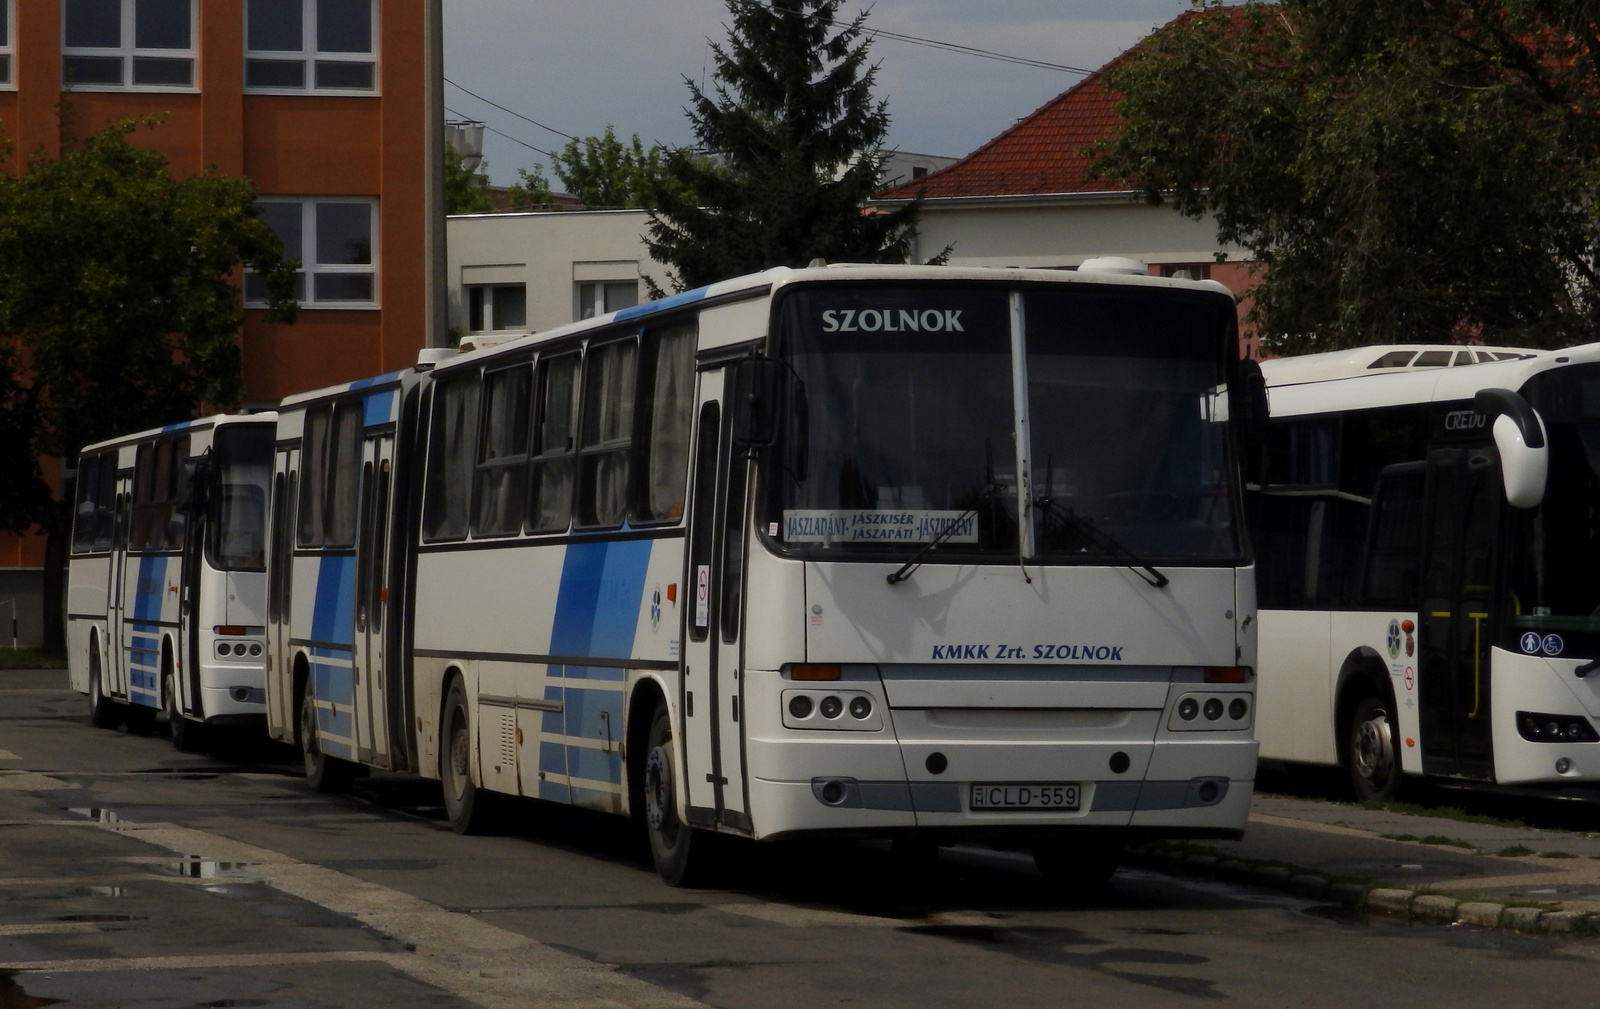 CLD-559 | Ikarus 280.02